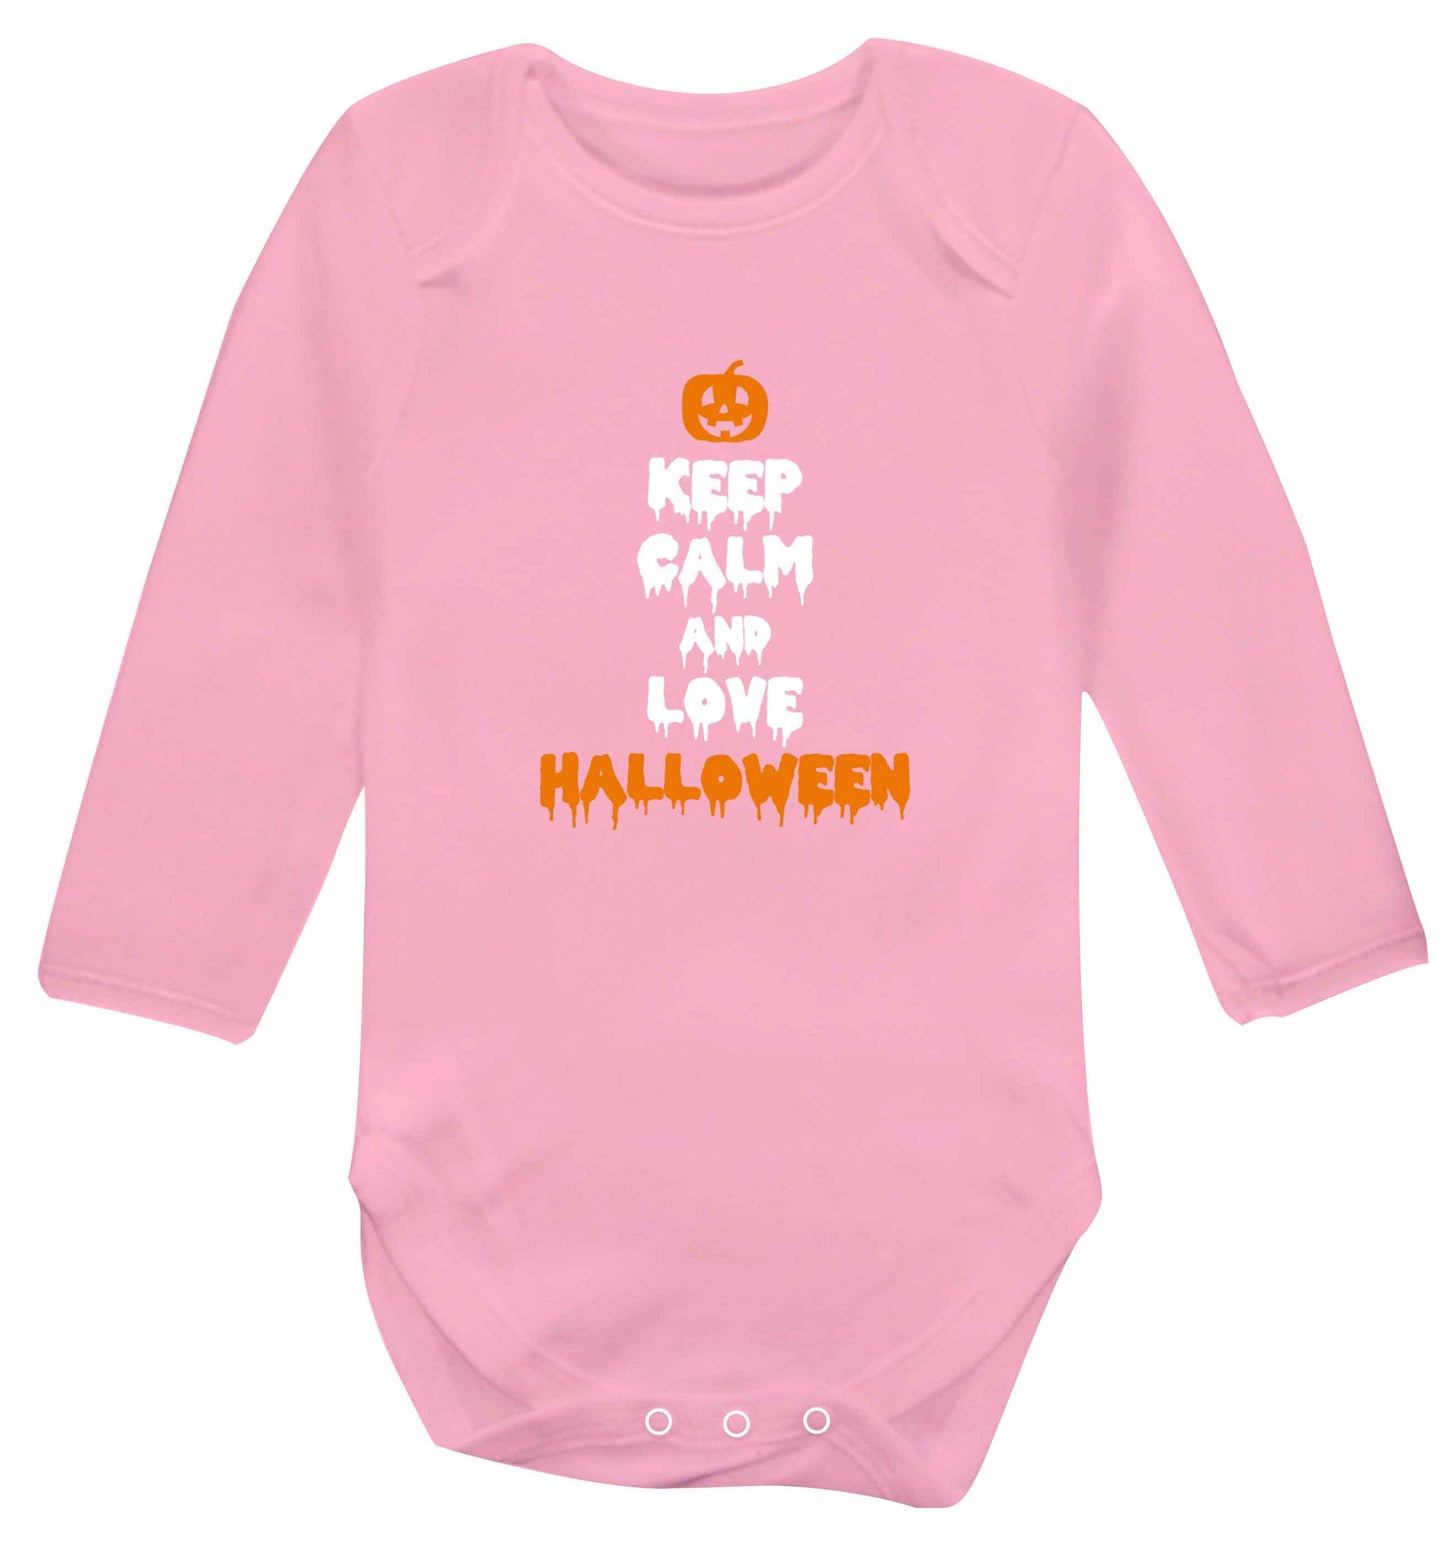 Keep calm and love halloween baby vest long sleeved pale pink 6-12 months